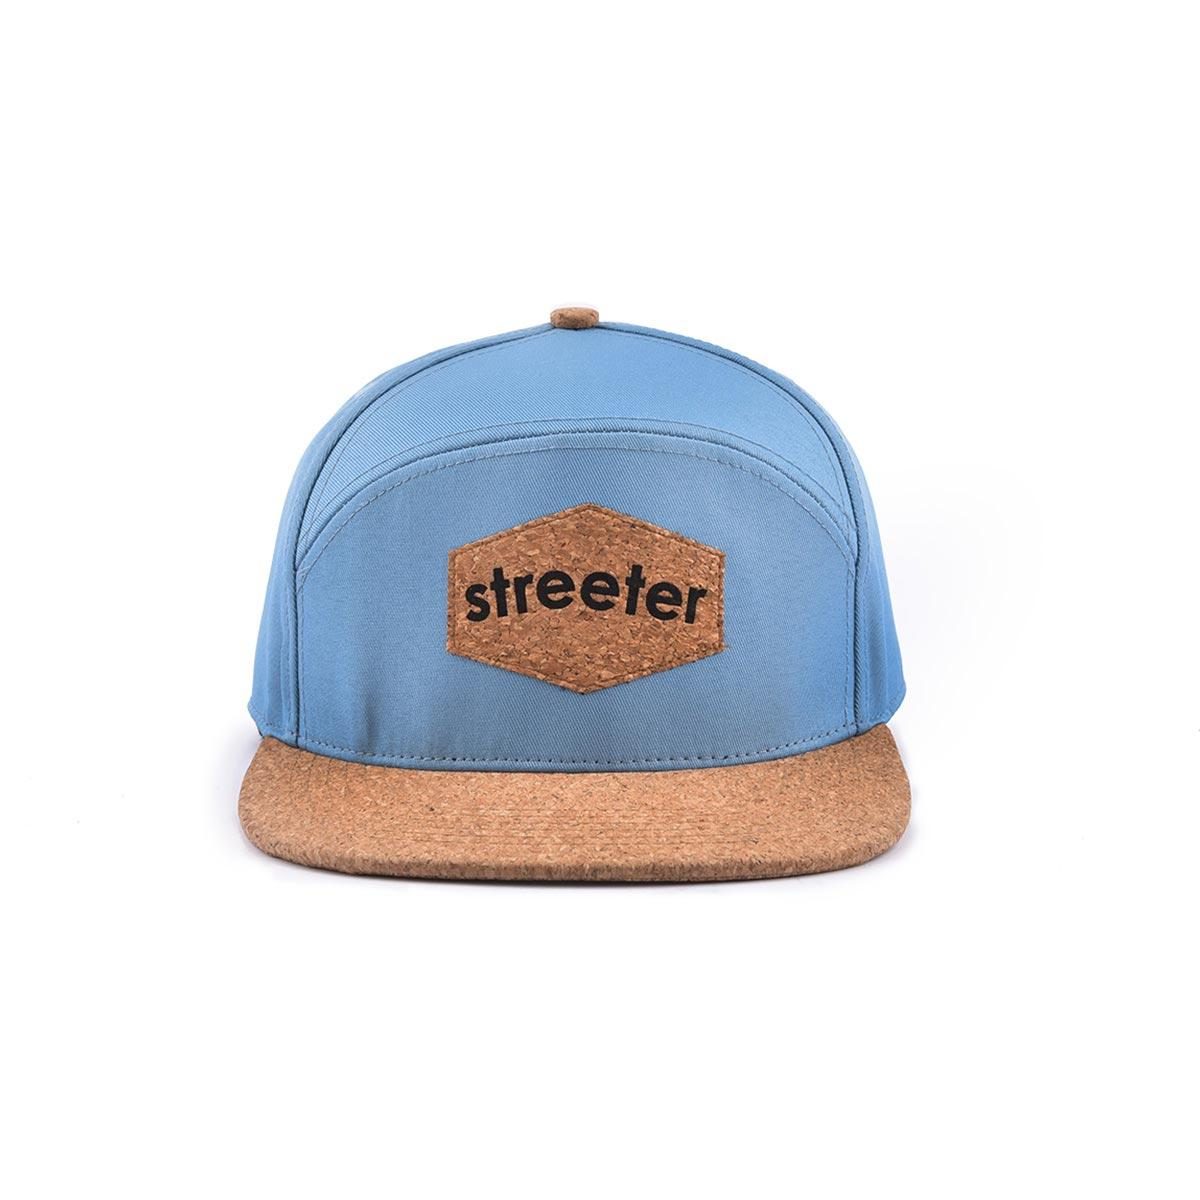 Streeter-unisex-blue-snapback-hat-for-outdoors-KN2101261-1